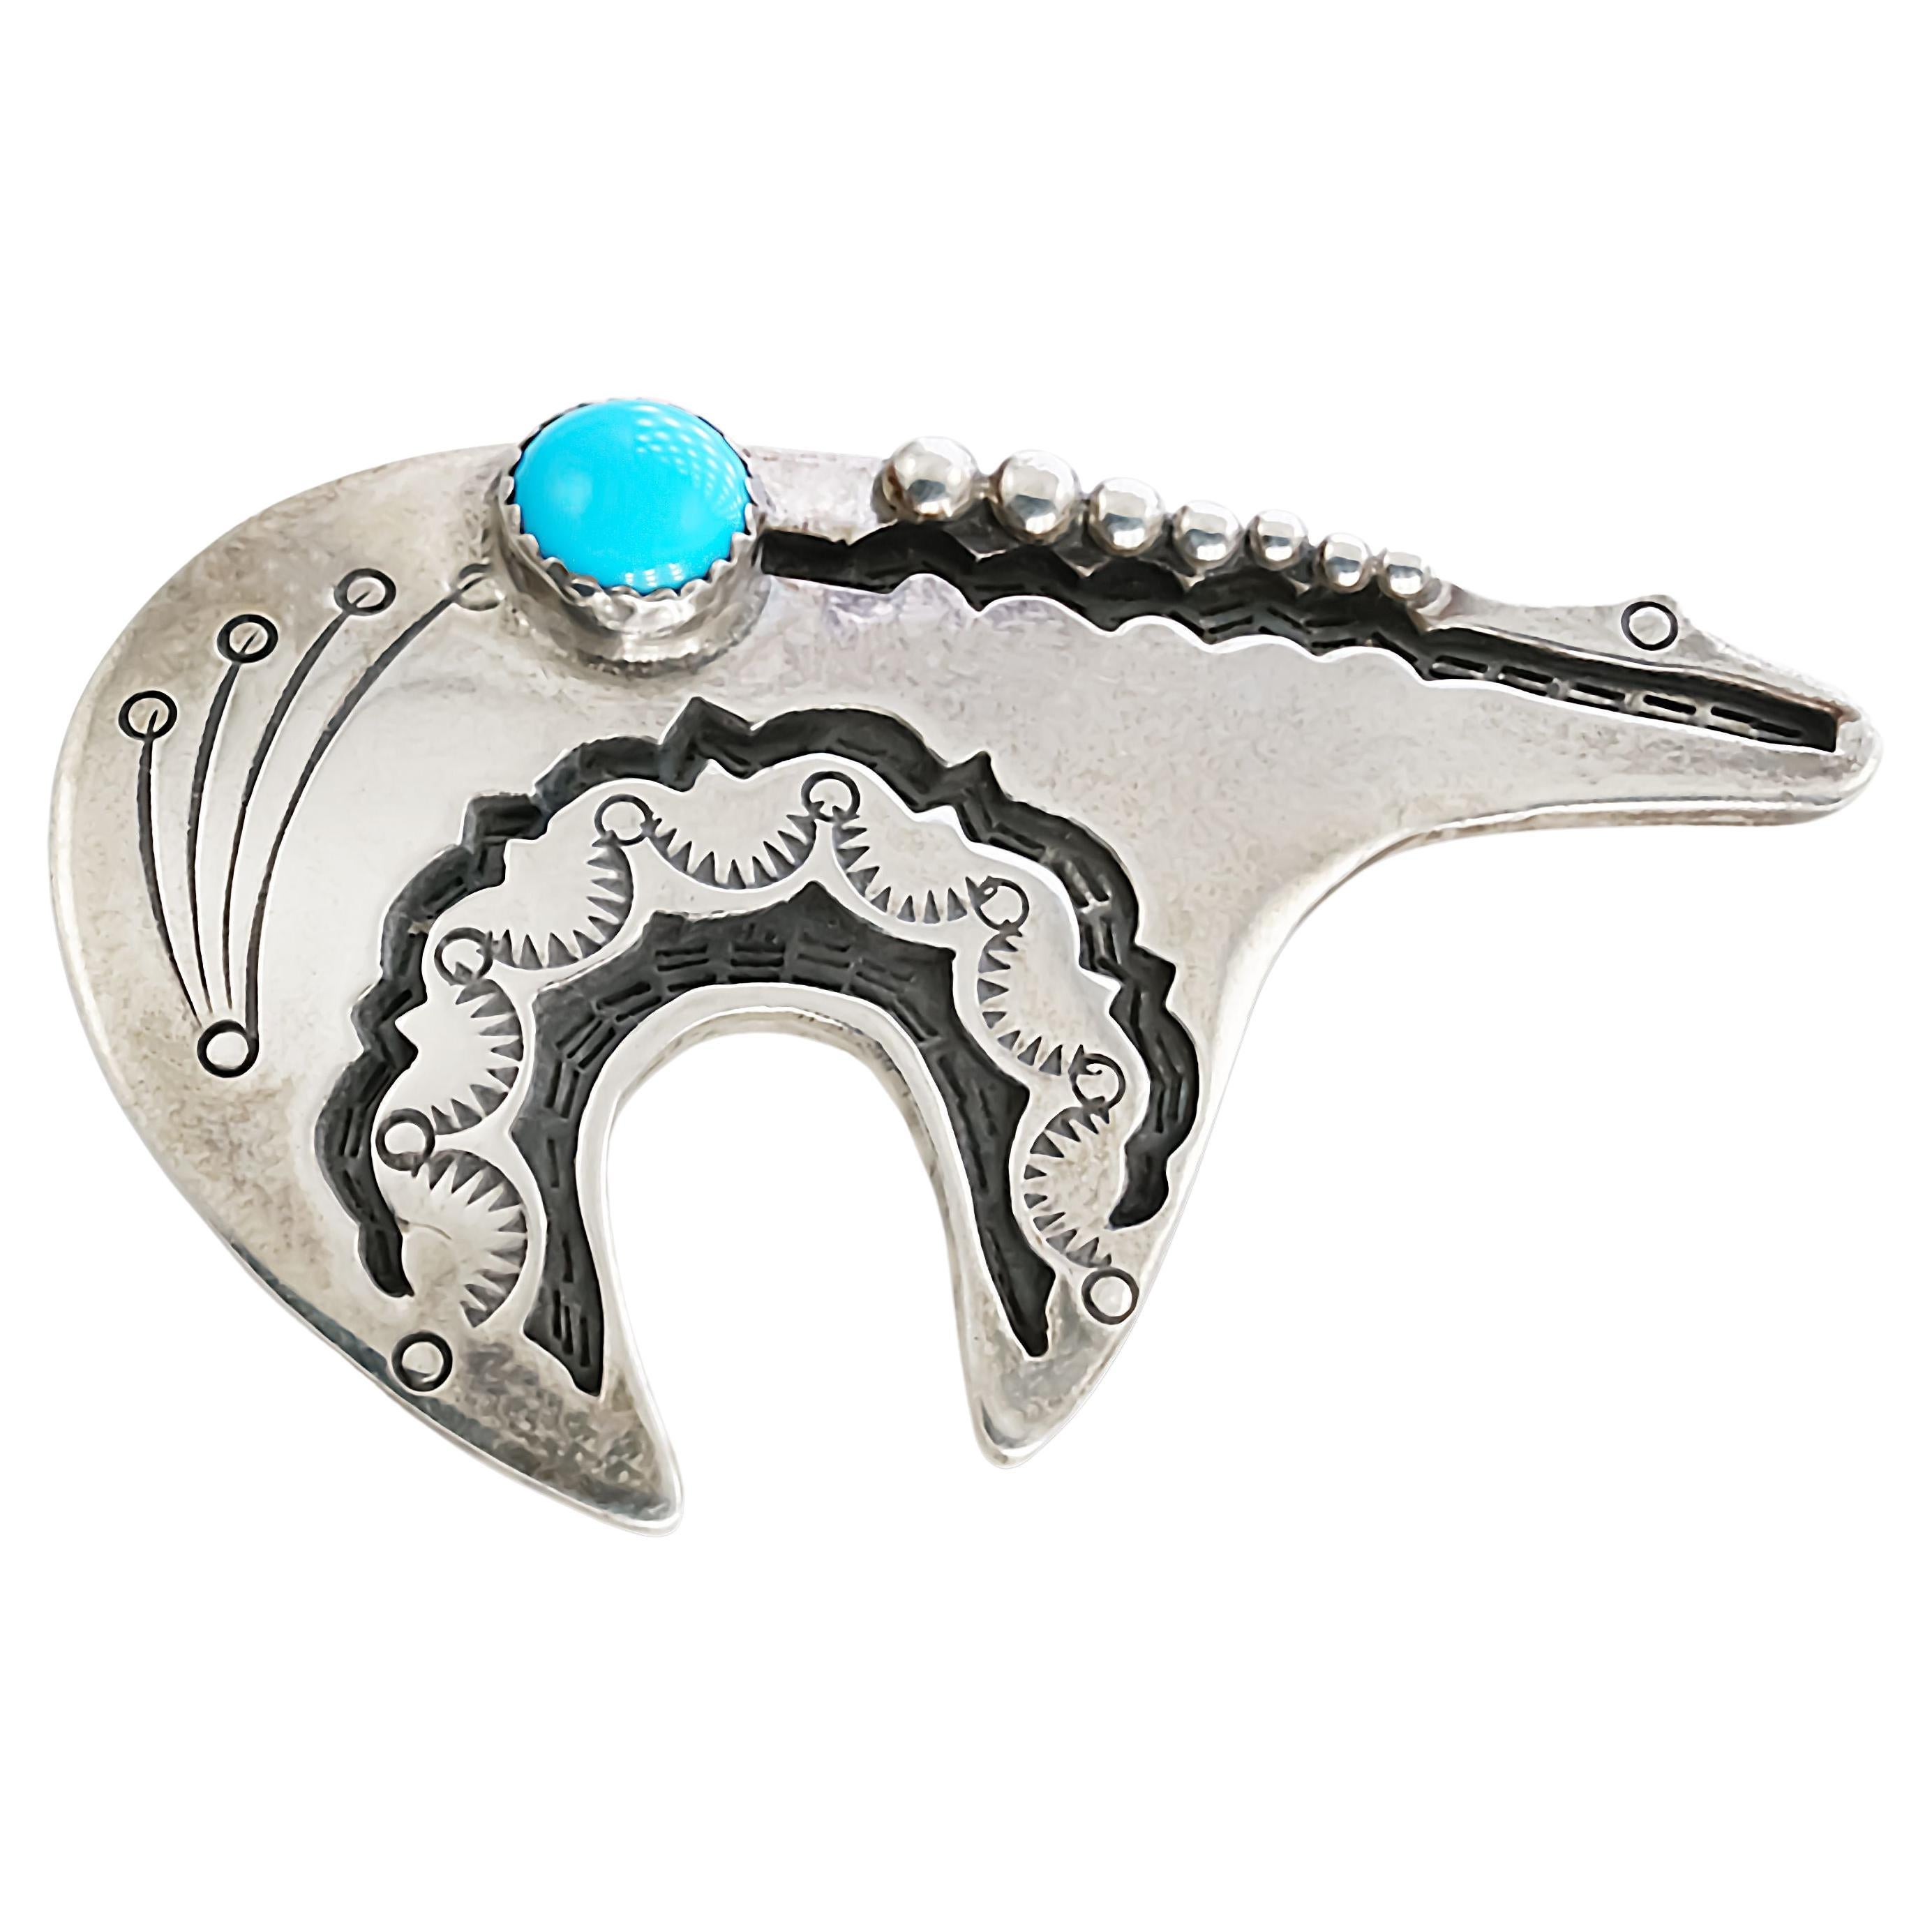 North American Navajo Sterling Silver and Turquoise Bear Brooch Pin Pendant